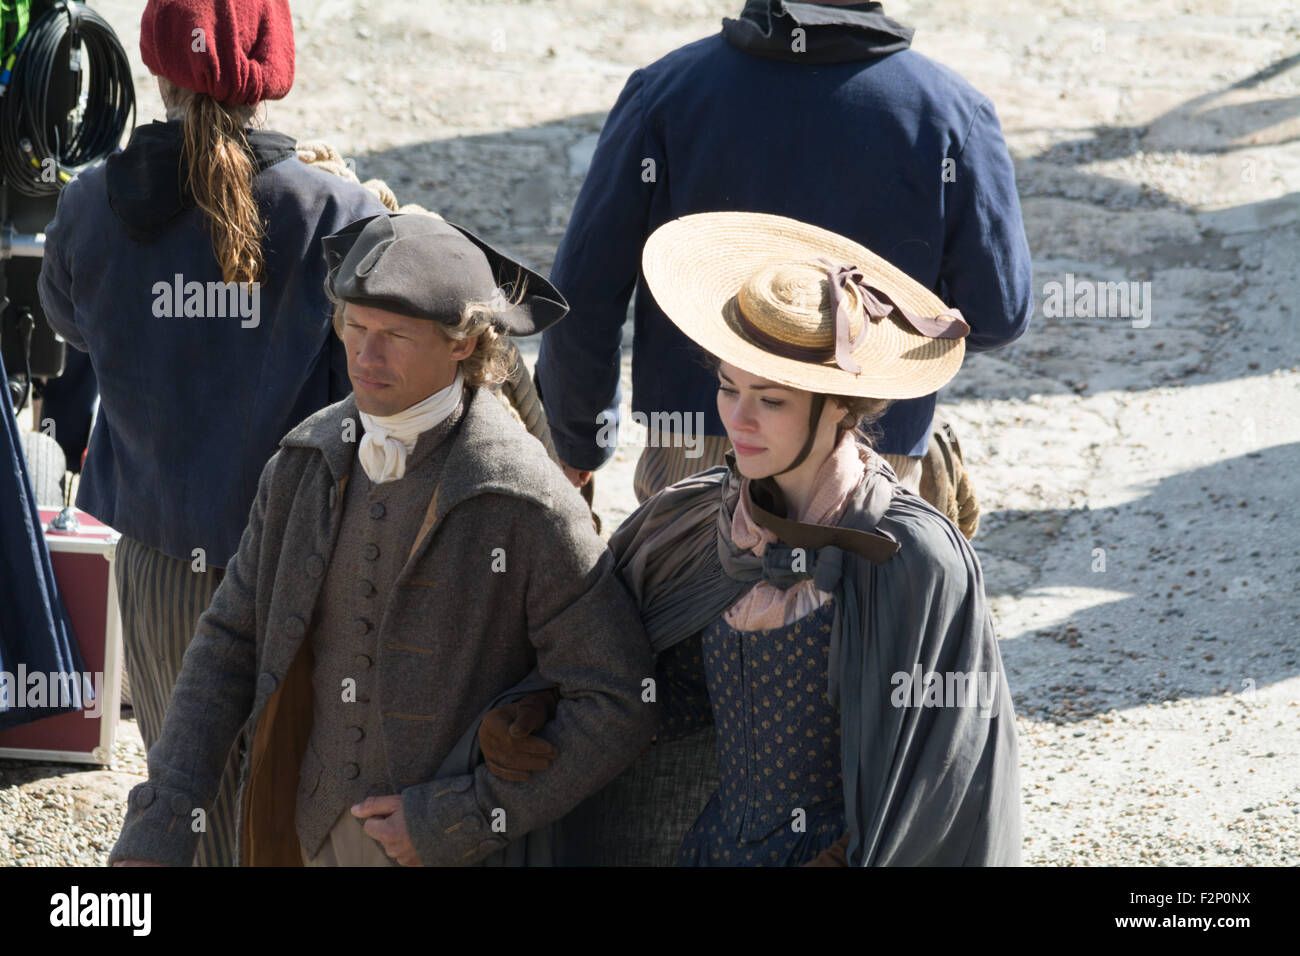 Charlestown, Cornwall, UK. 22nd September 2015. The BBC Poldark series, staring Aidan Turner, continues filming in Charlestown, with a crowd of onlookers watching. Credit:  Simon Maycock/Alamy Live News Stock Photo